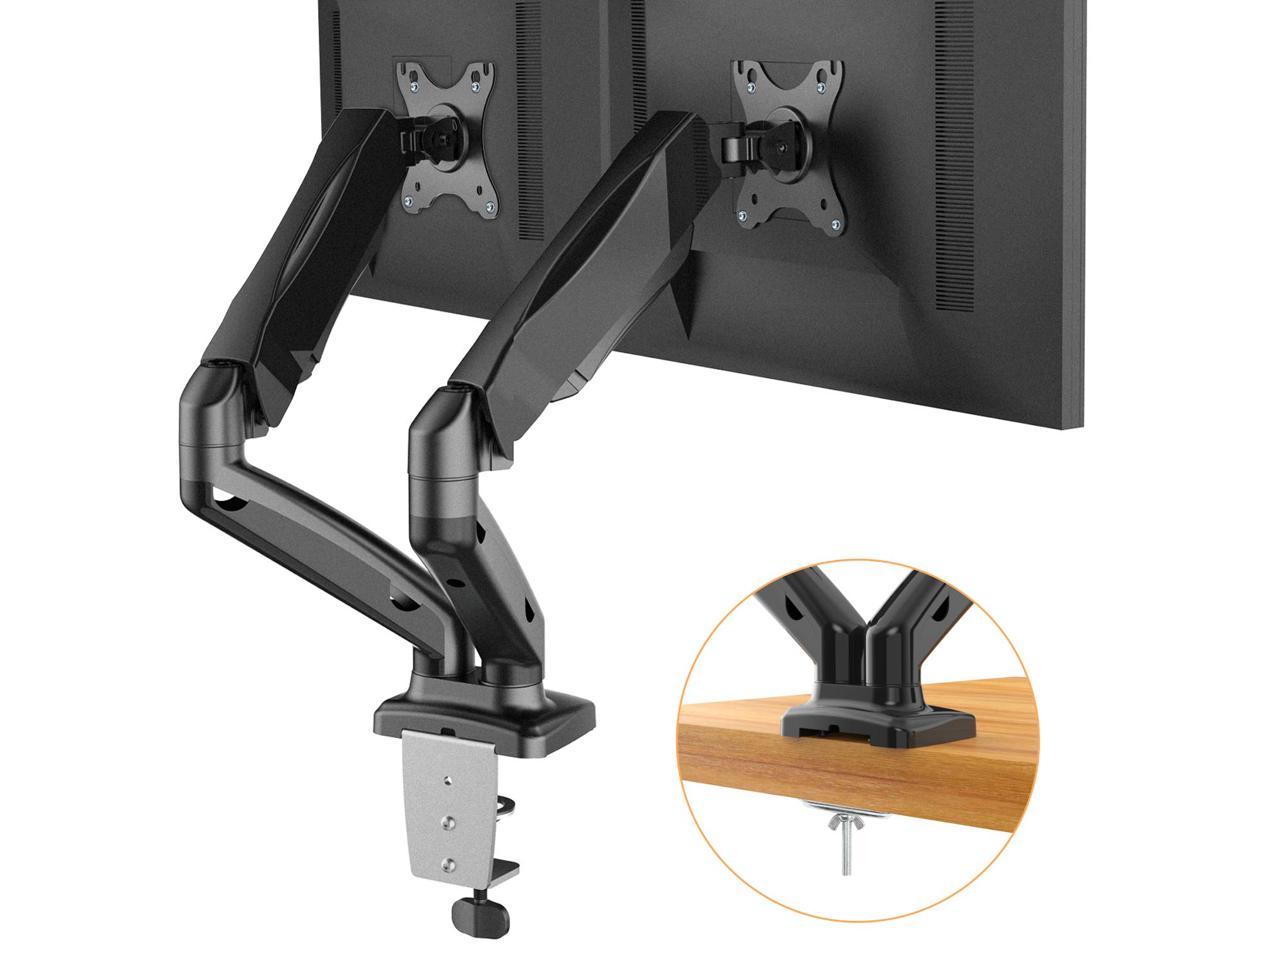 Grommet Mounting For Most 17-27 Inch Flat Curved Computer Monitors Adjustable Gas Spring Monitor Arm Desk Mount Swivel VESA Mount with C Clamp ErGear Single Monitor Mount Stand Hold up to 14.3lbs 